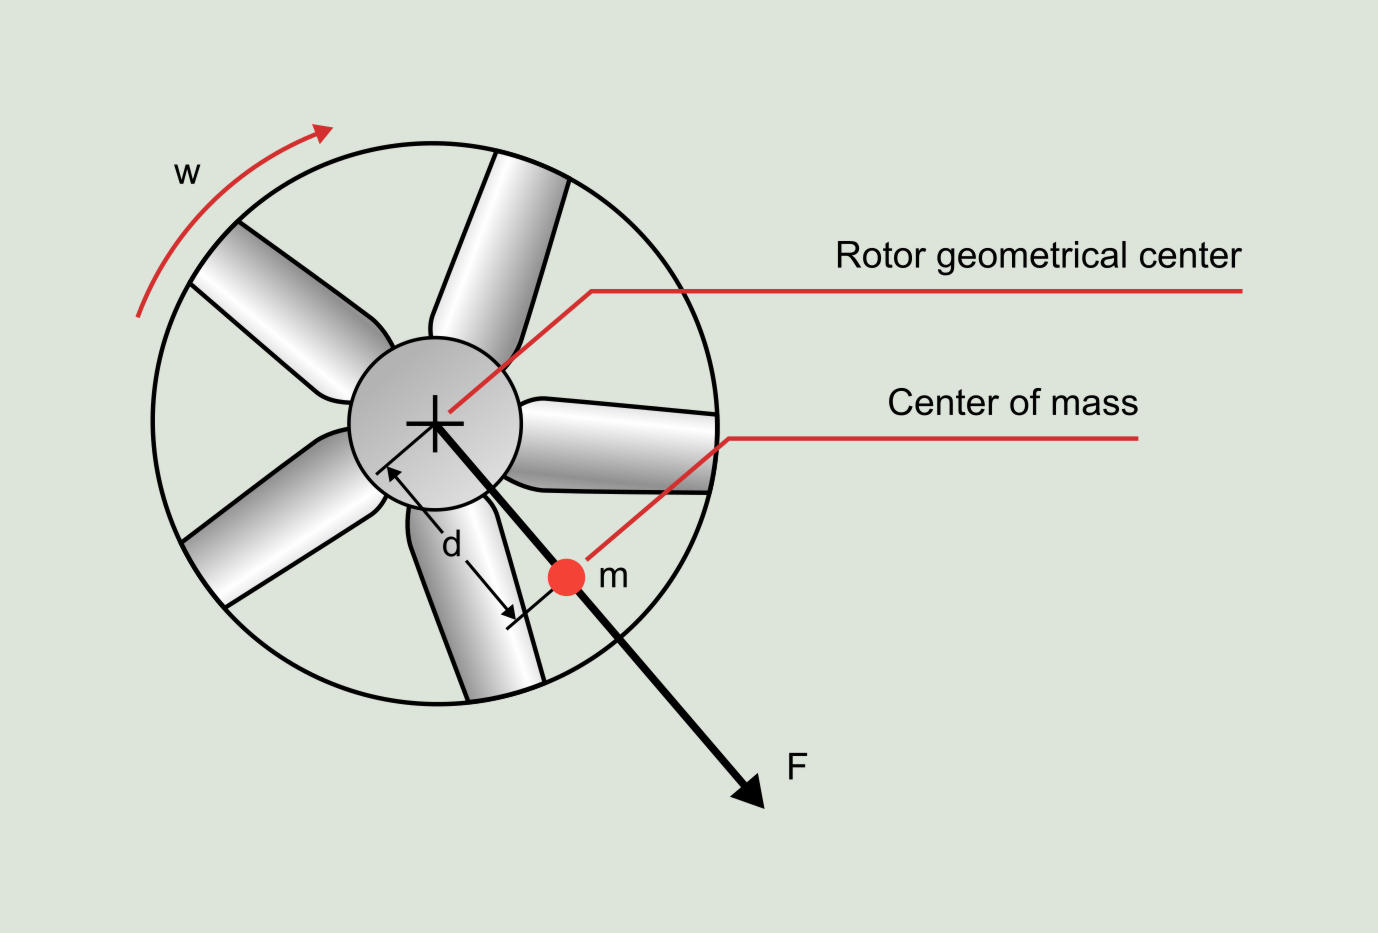 Figure 5.2: Centrifugal force associated with an imbalanced rotor